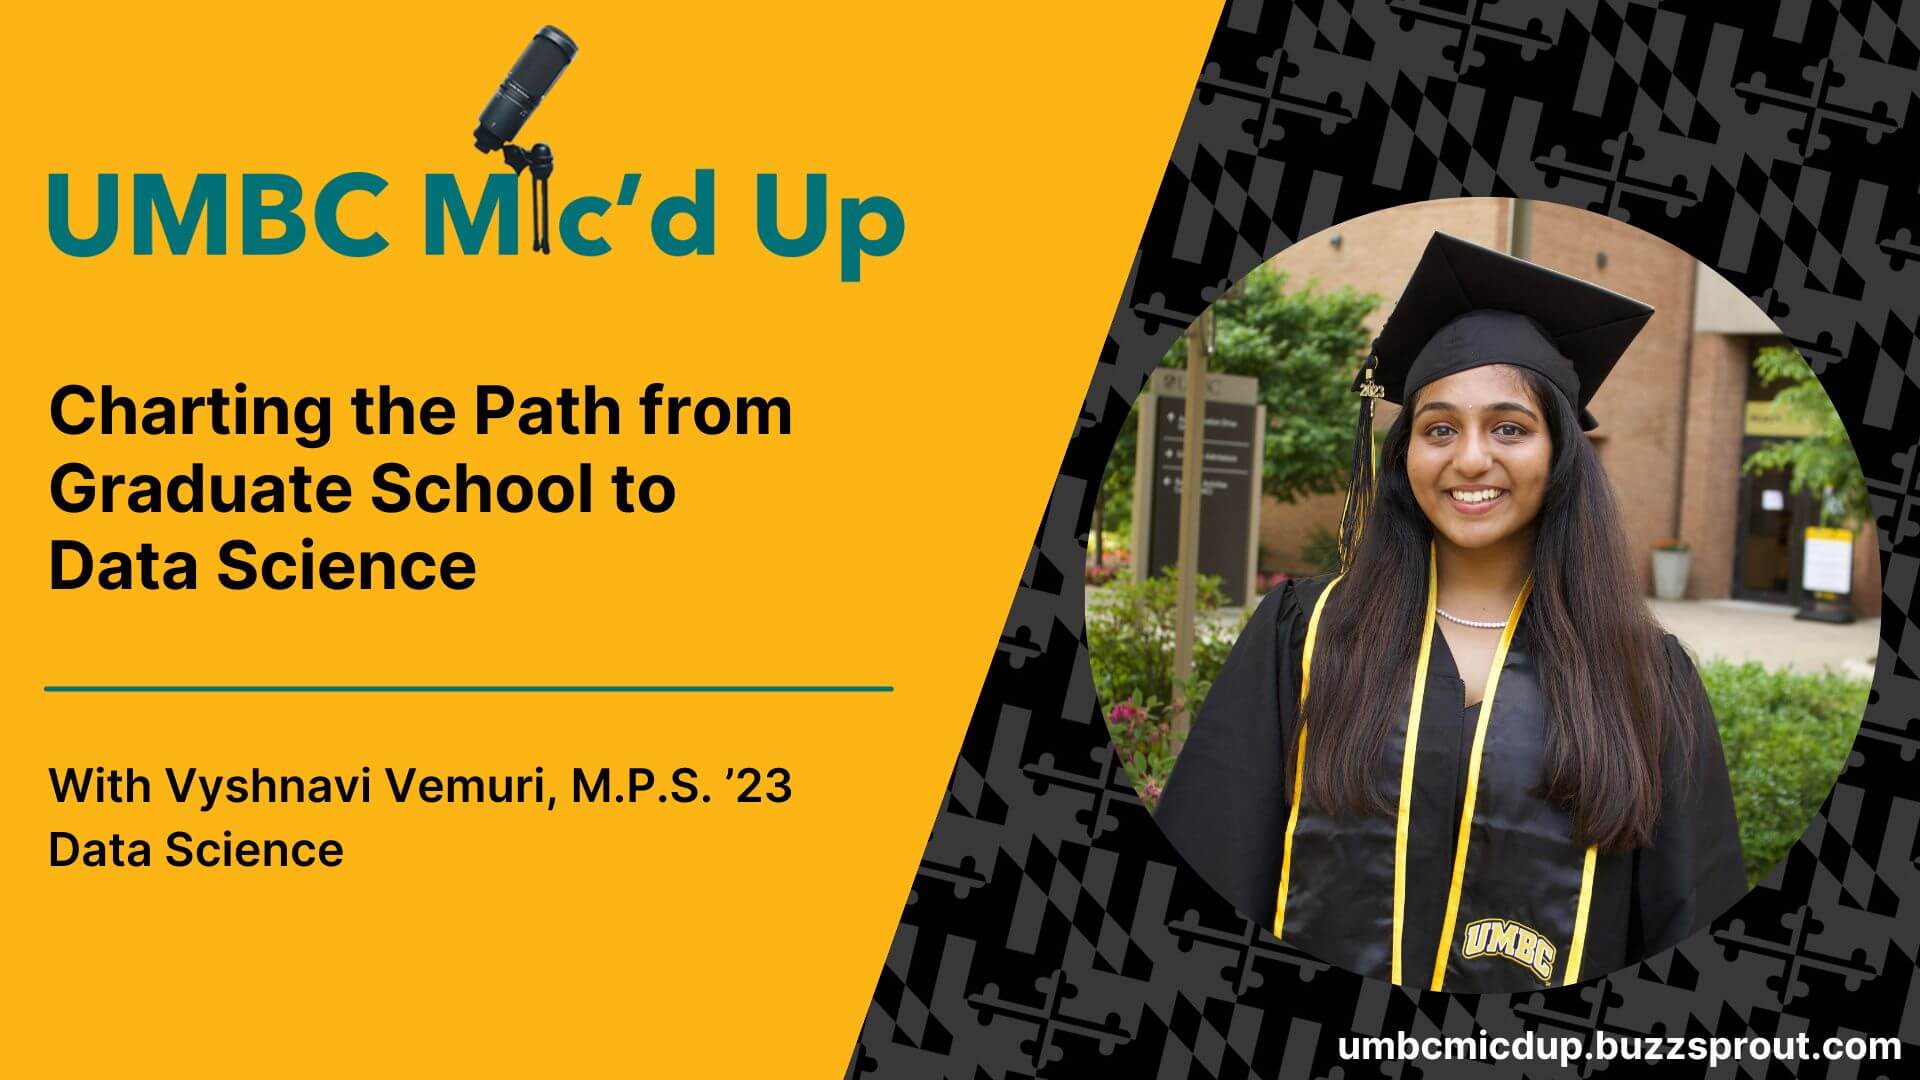 UMBC Mic'd Up Podcast featuring Vyshnavi Vemuri from Data Science